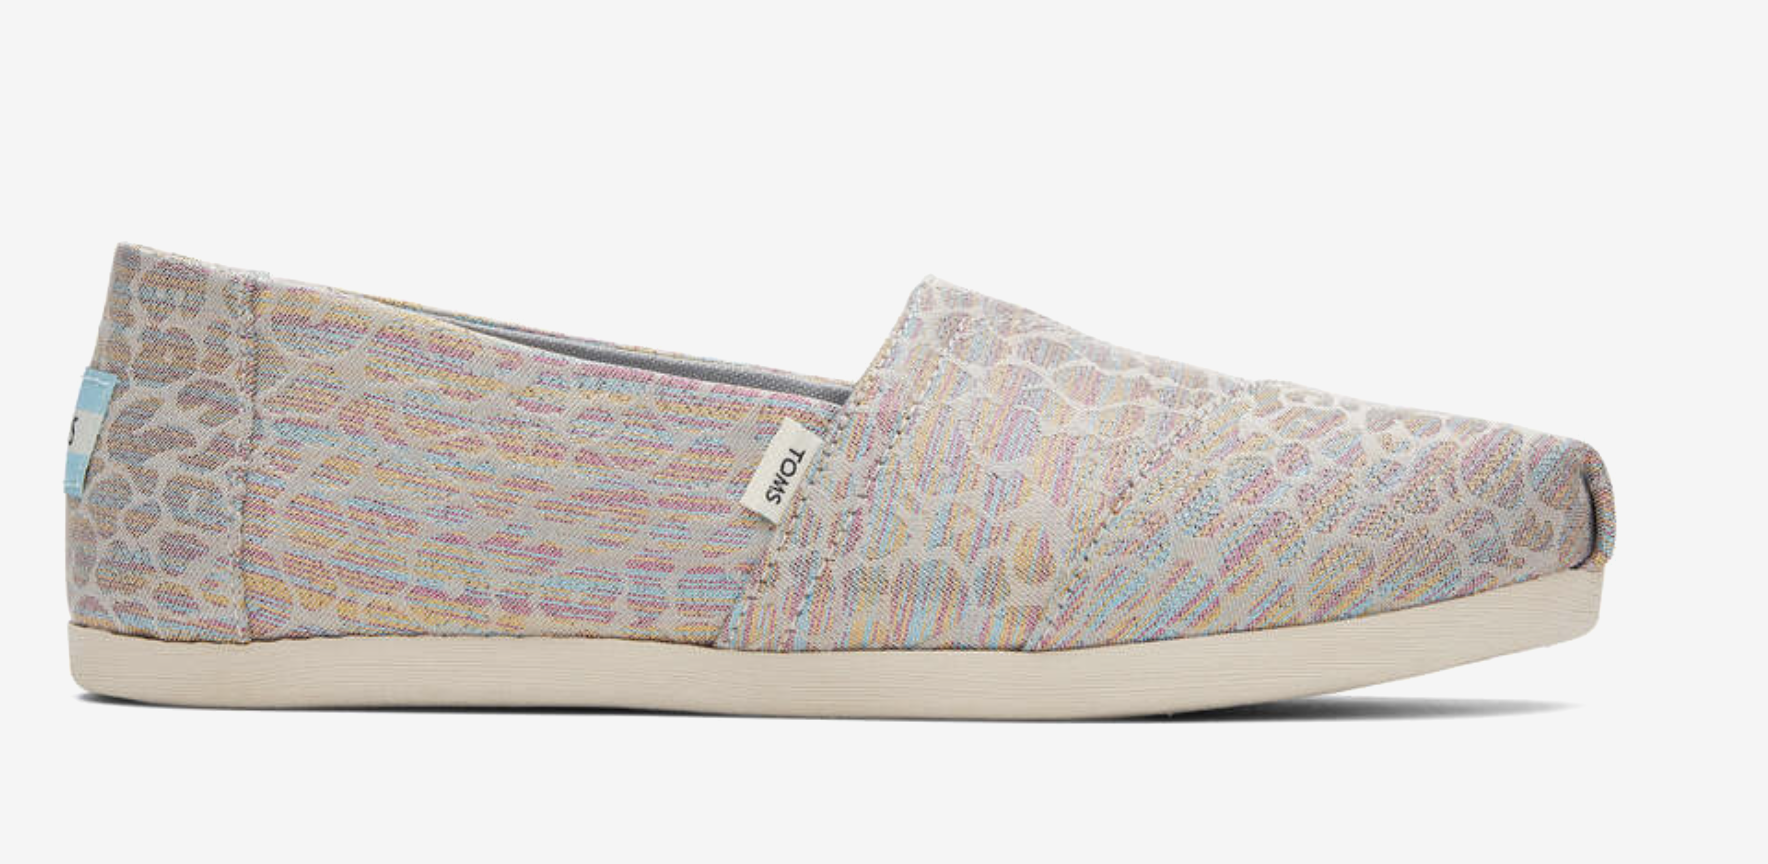 TOMS: Up To 75% off sale styles.